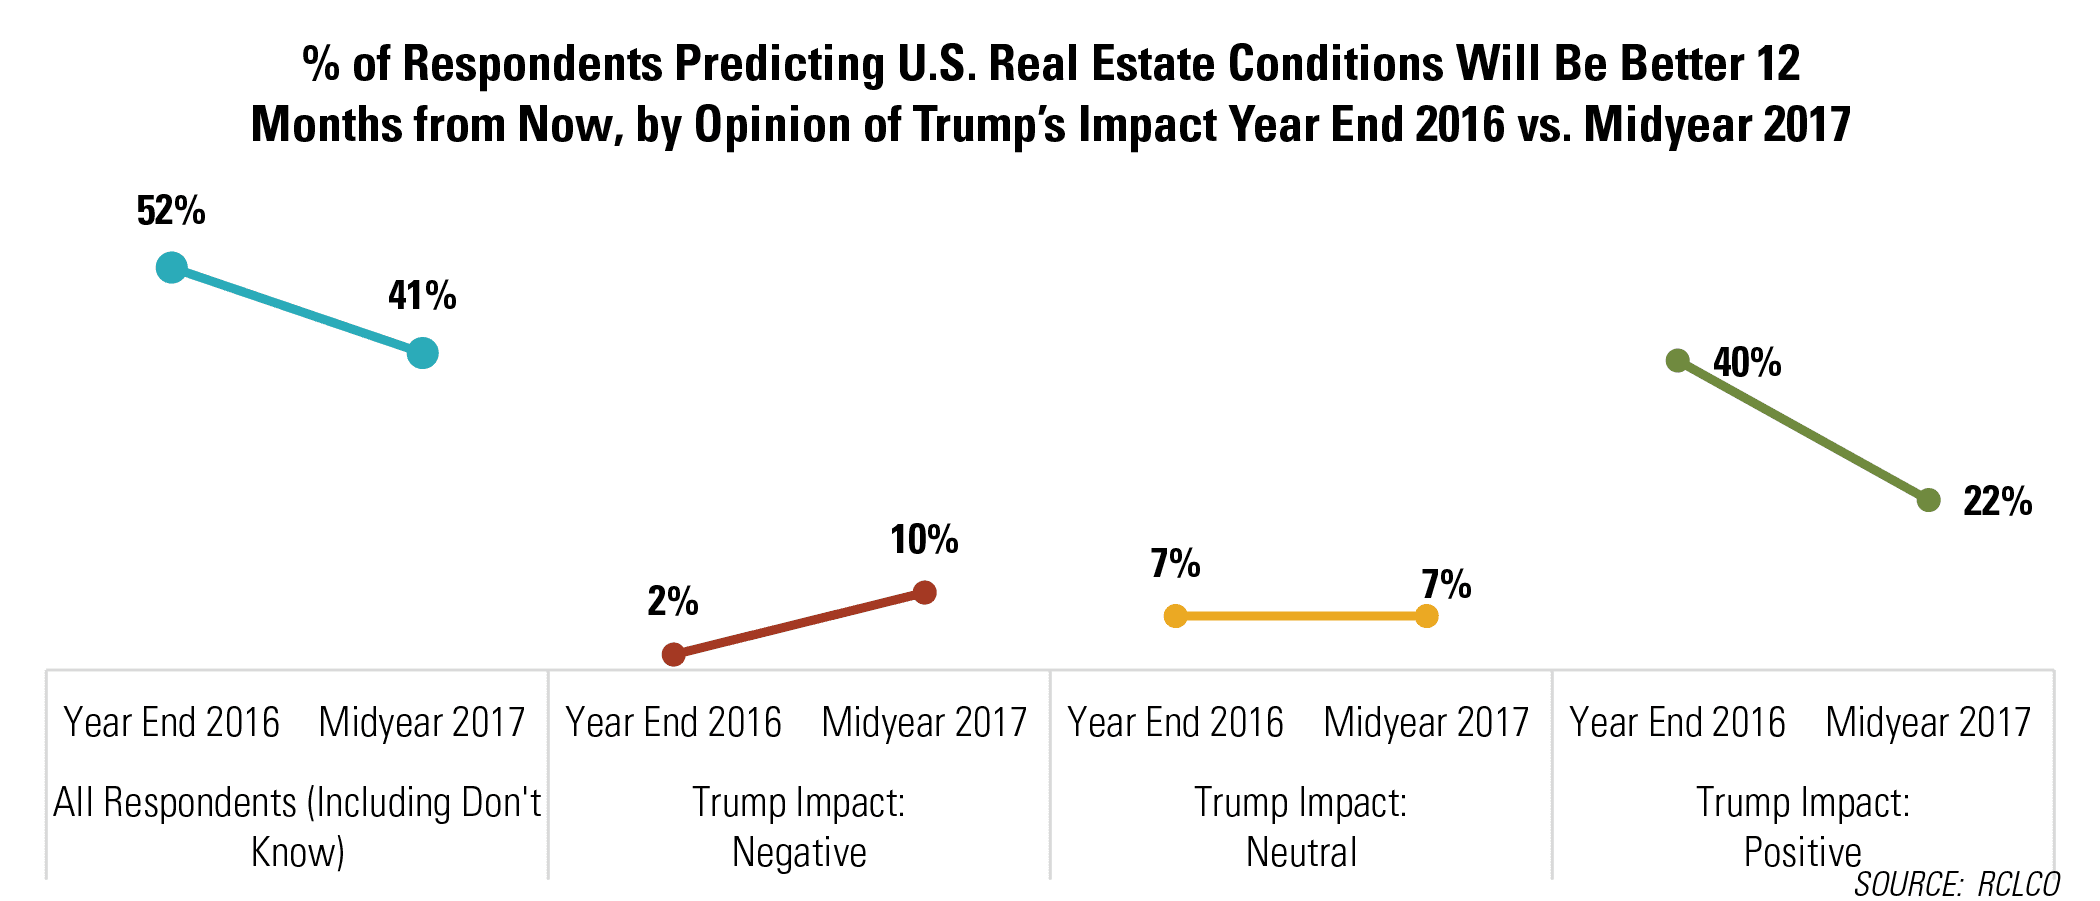 Percent of Respondents Predicting U.S. Real Estate Conditions Will Be Better 12 Months from Now, by Opinion of Trumpâs Impact Year End 2016 vs. Midyear 2017